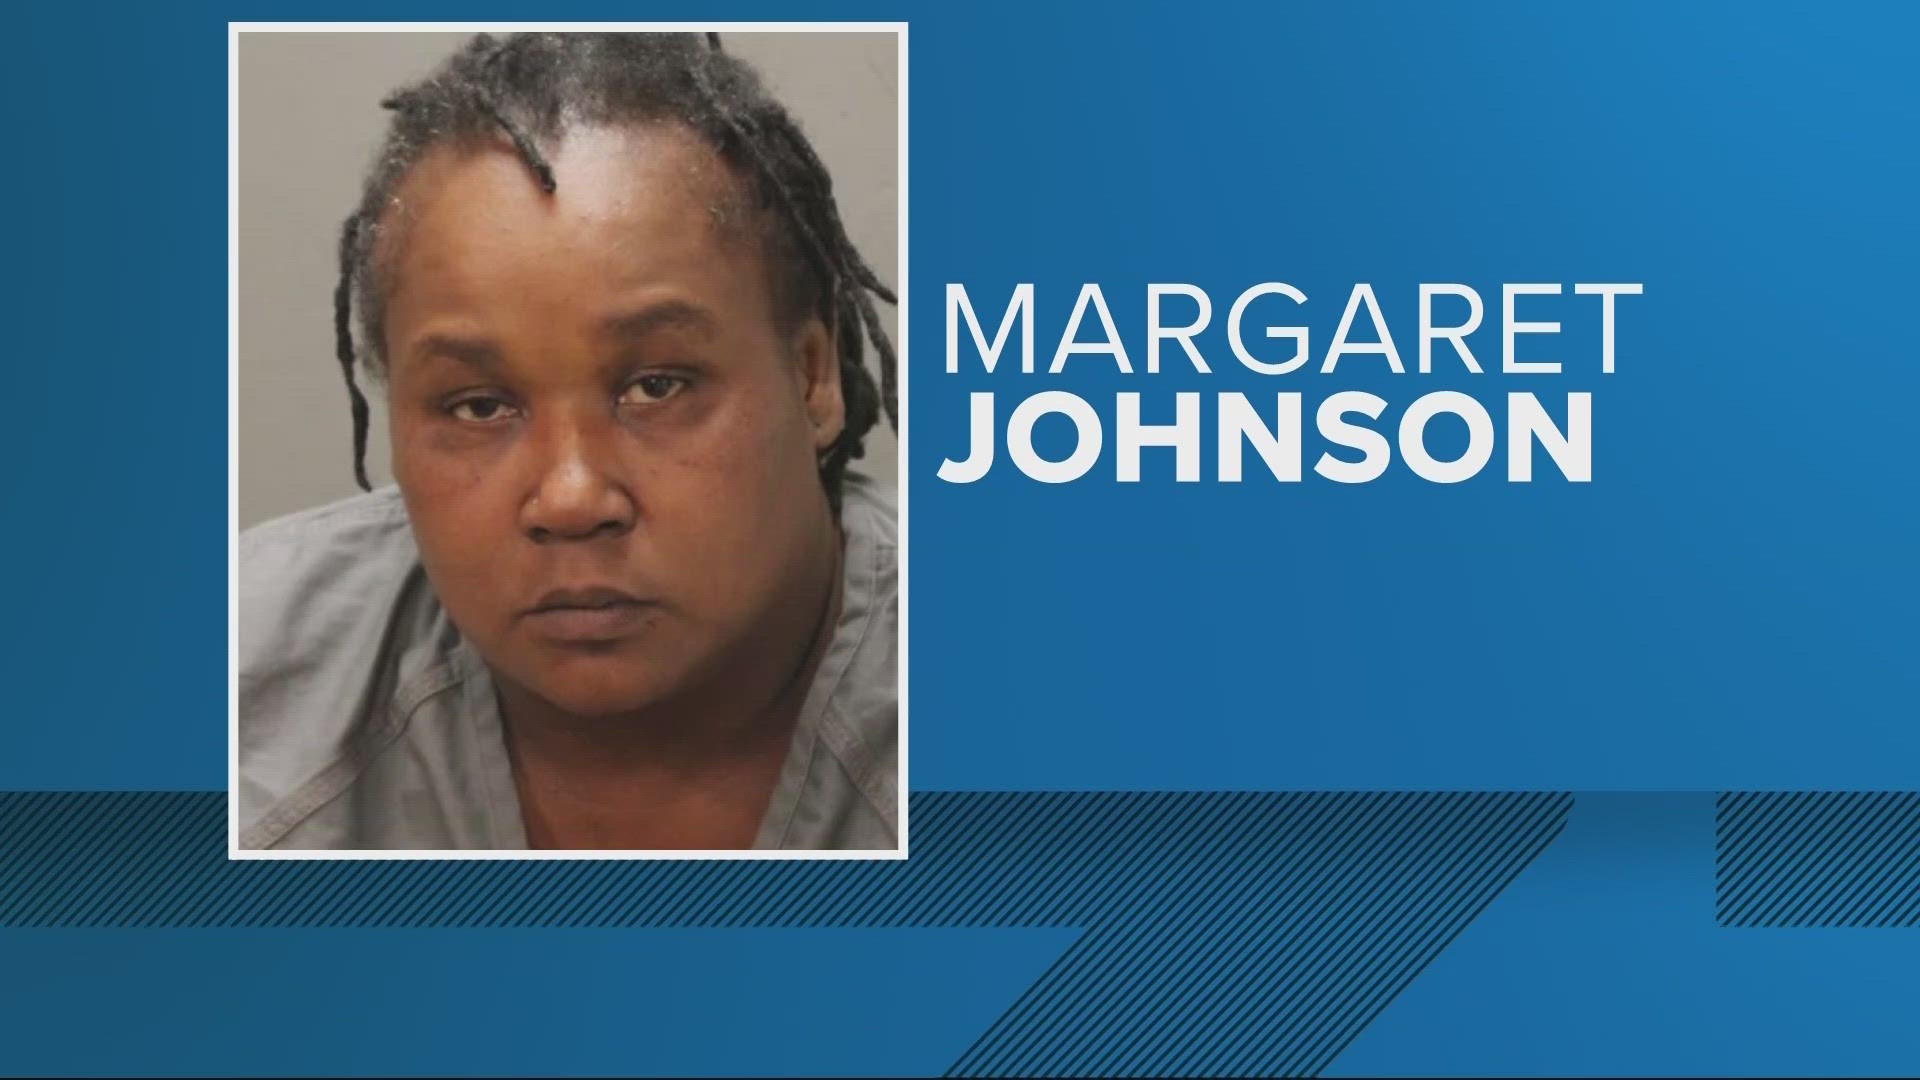 Margaret Johnson, 43, was charged with child neglect.